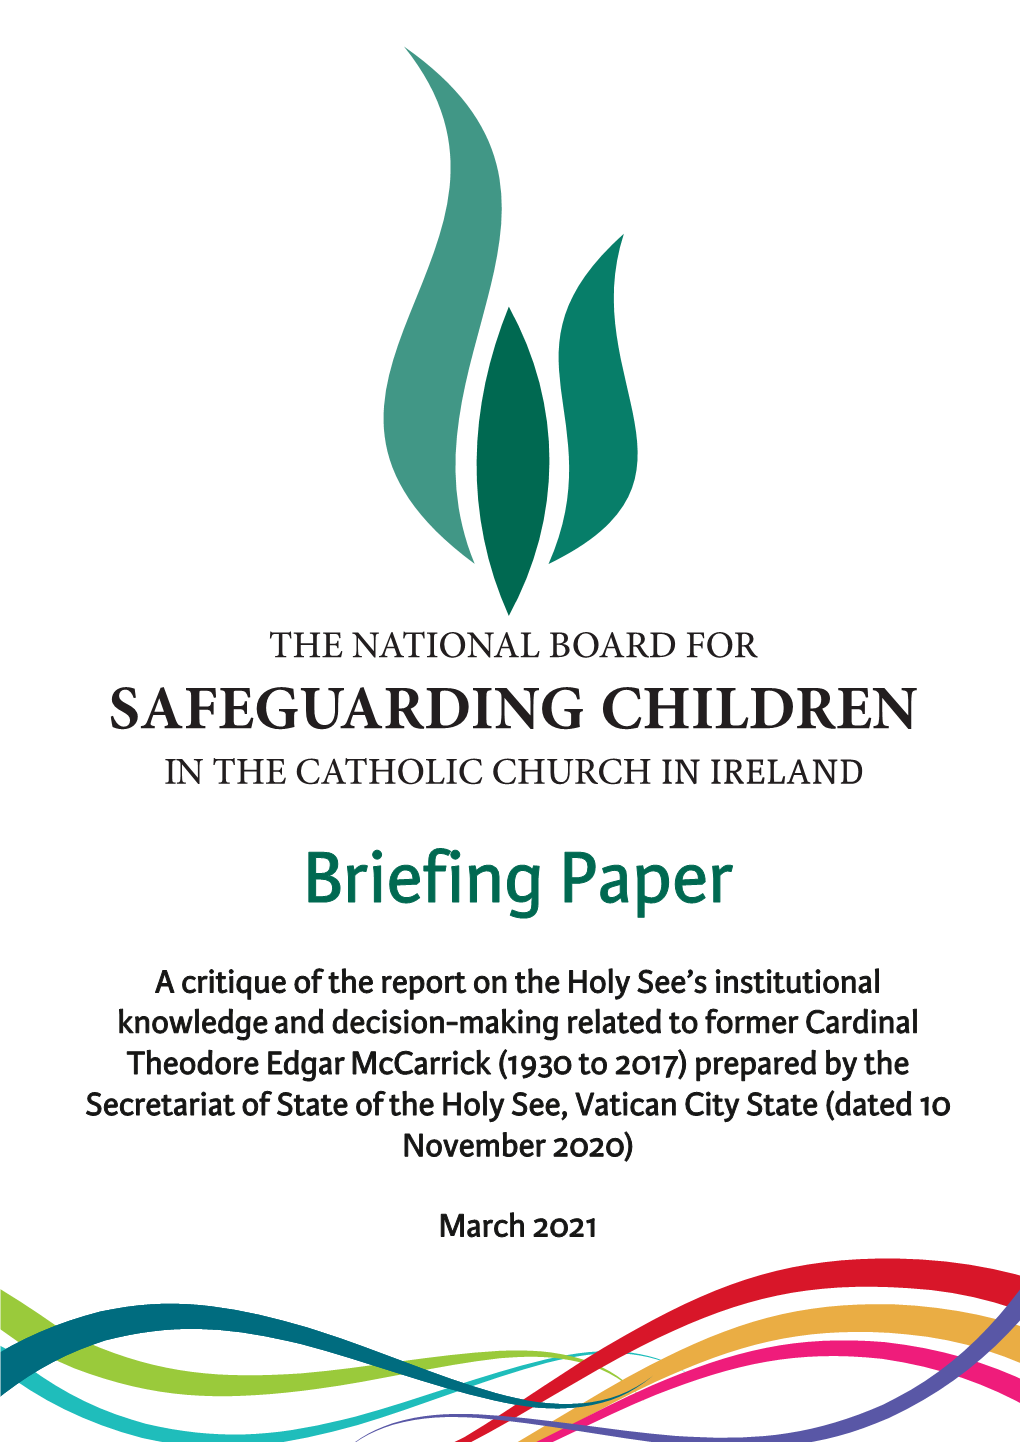 Briefing Paper 1-A Critique of the Report on the Holy See's Institutional